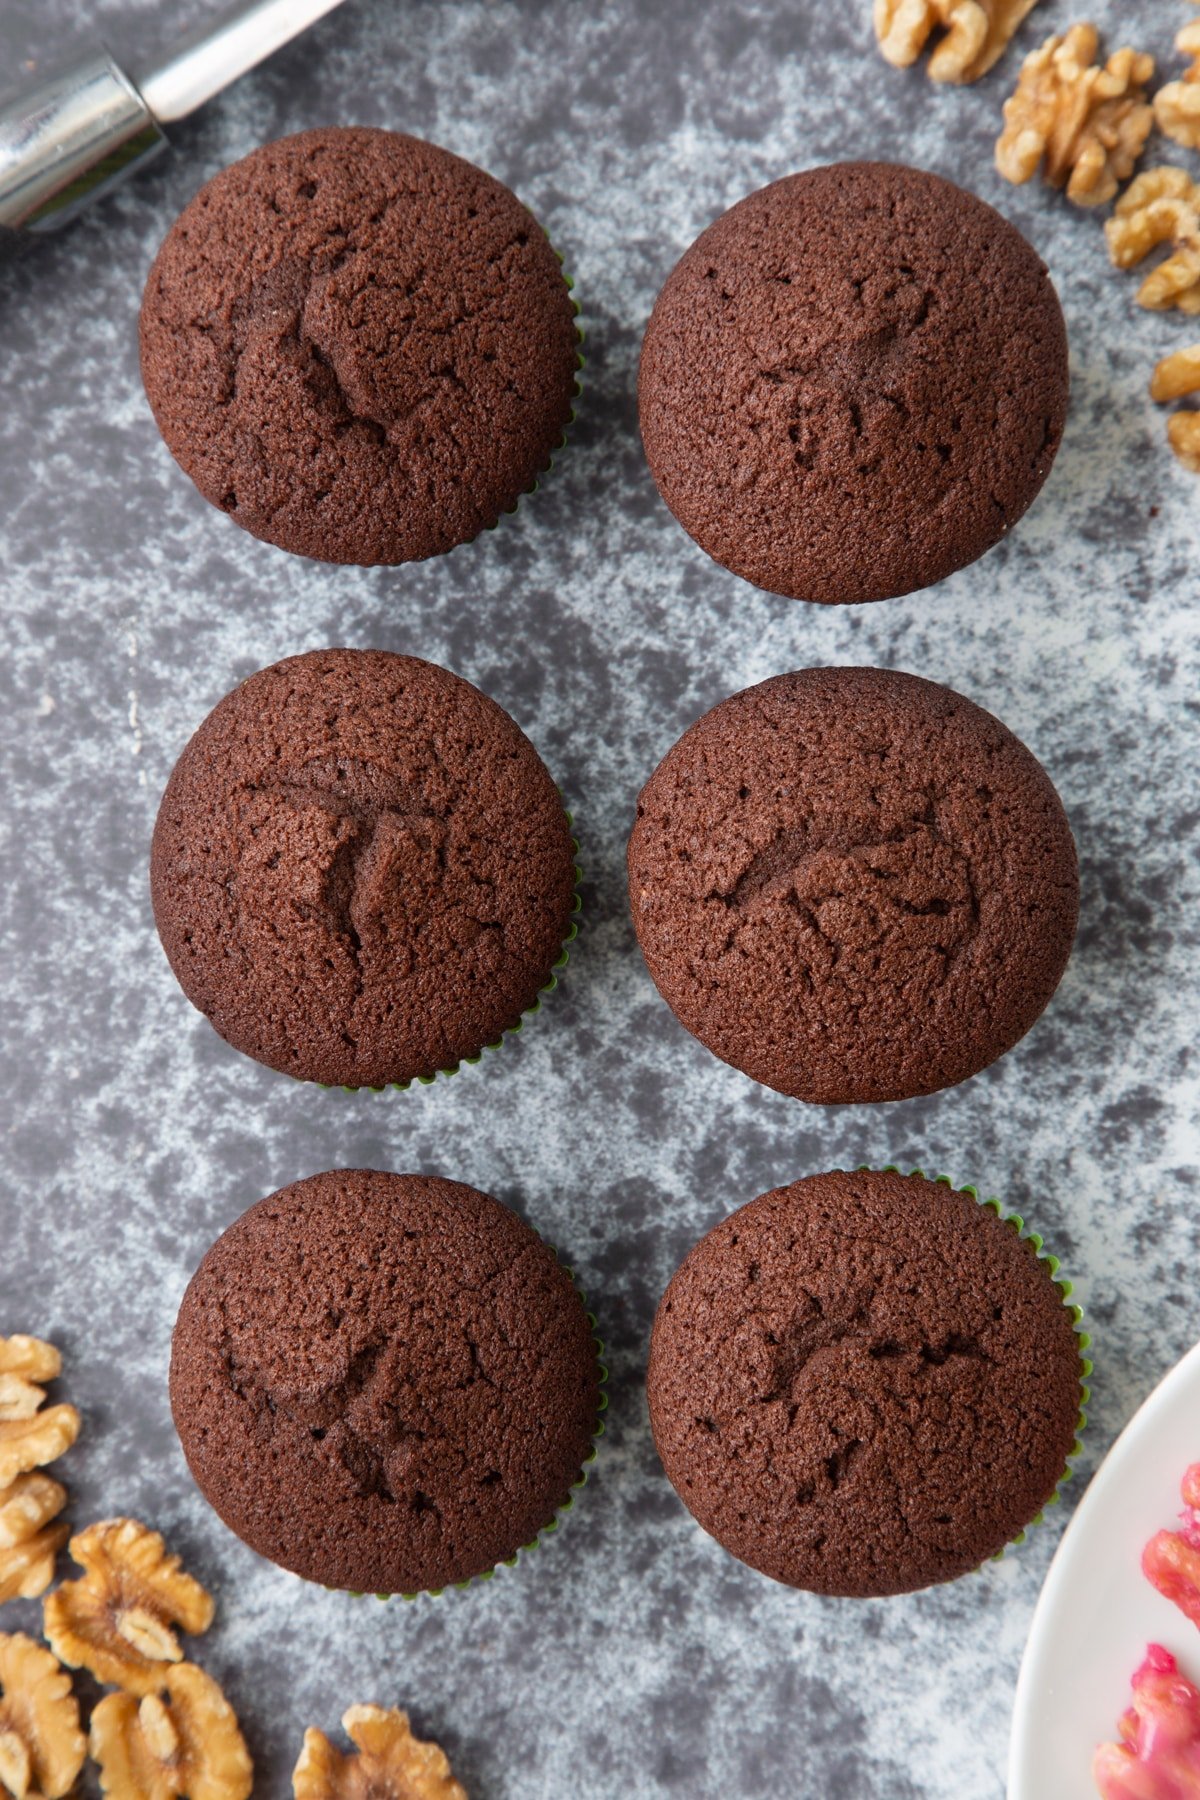 Six chocolate cupcakes. Ingredients to make gory Halloween cupcakes surround them.